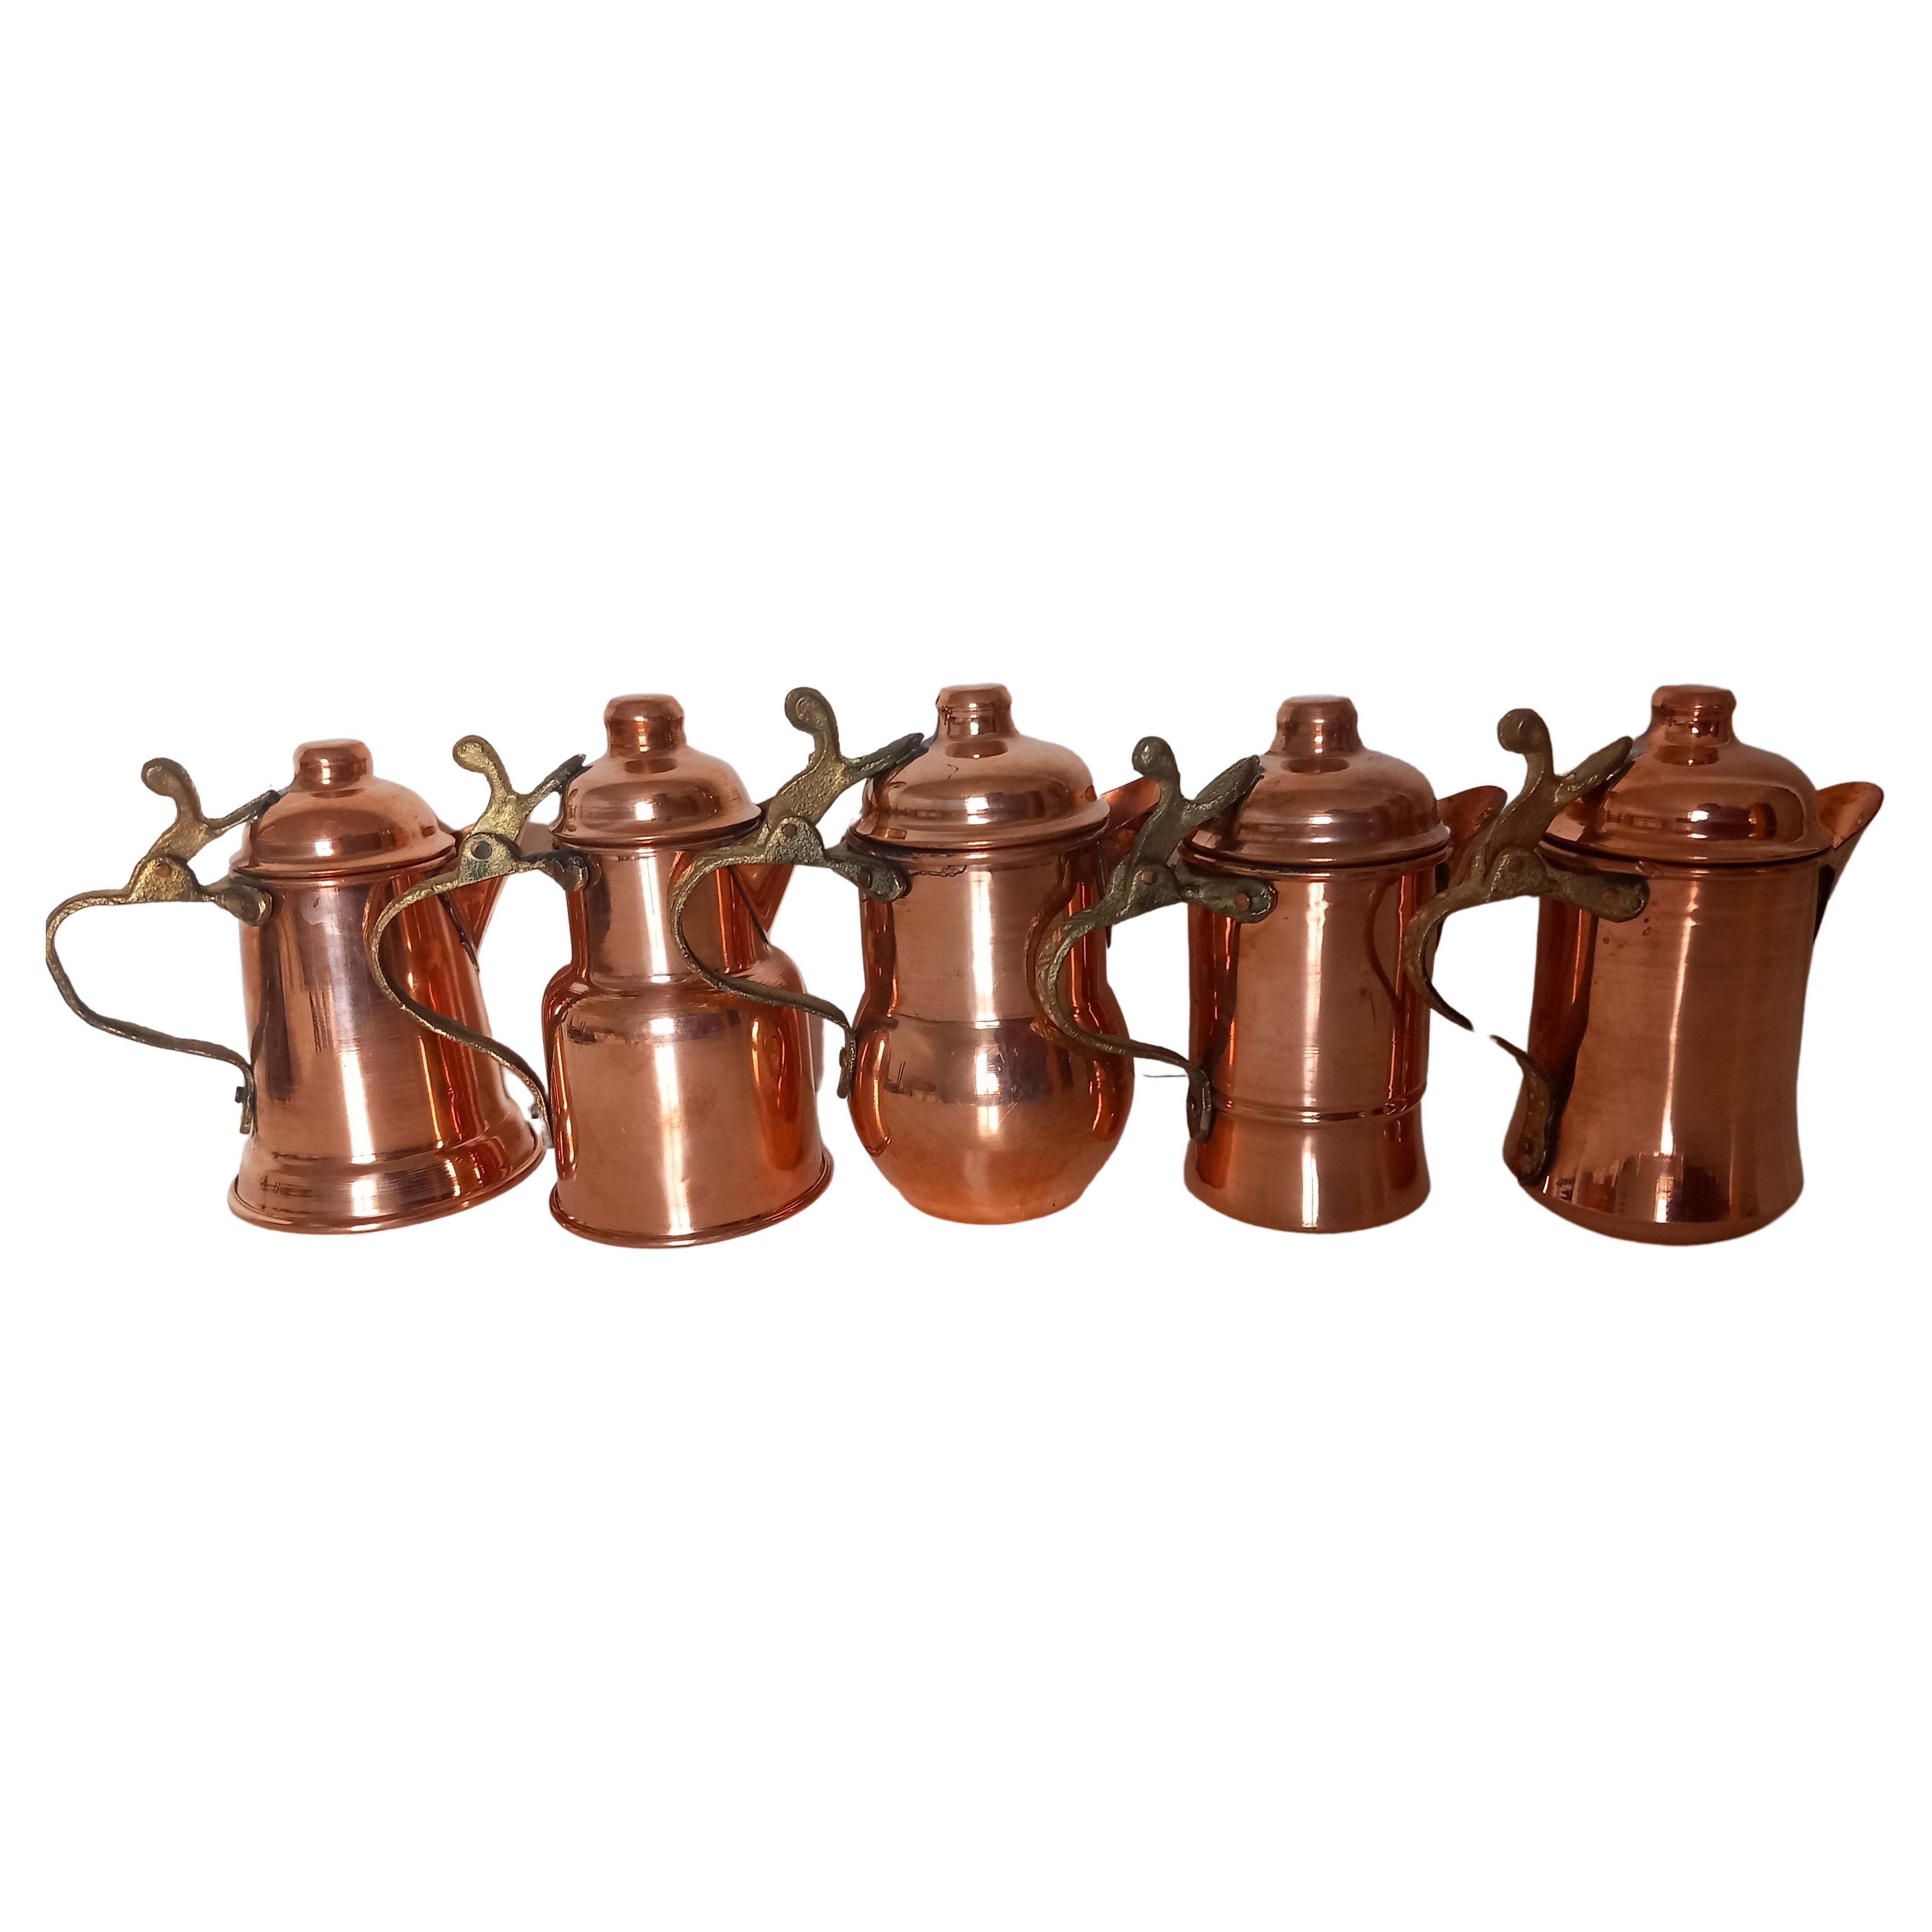 Lot of five vintage copper coffee pots for rustic kitchen decoration
 vintage rustic style copper kitchen decoration
They are very decorative pieces. They come from Tuscany, Italy and will give your kitchen a very special touch.

Beautiful copper